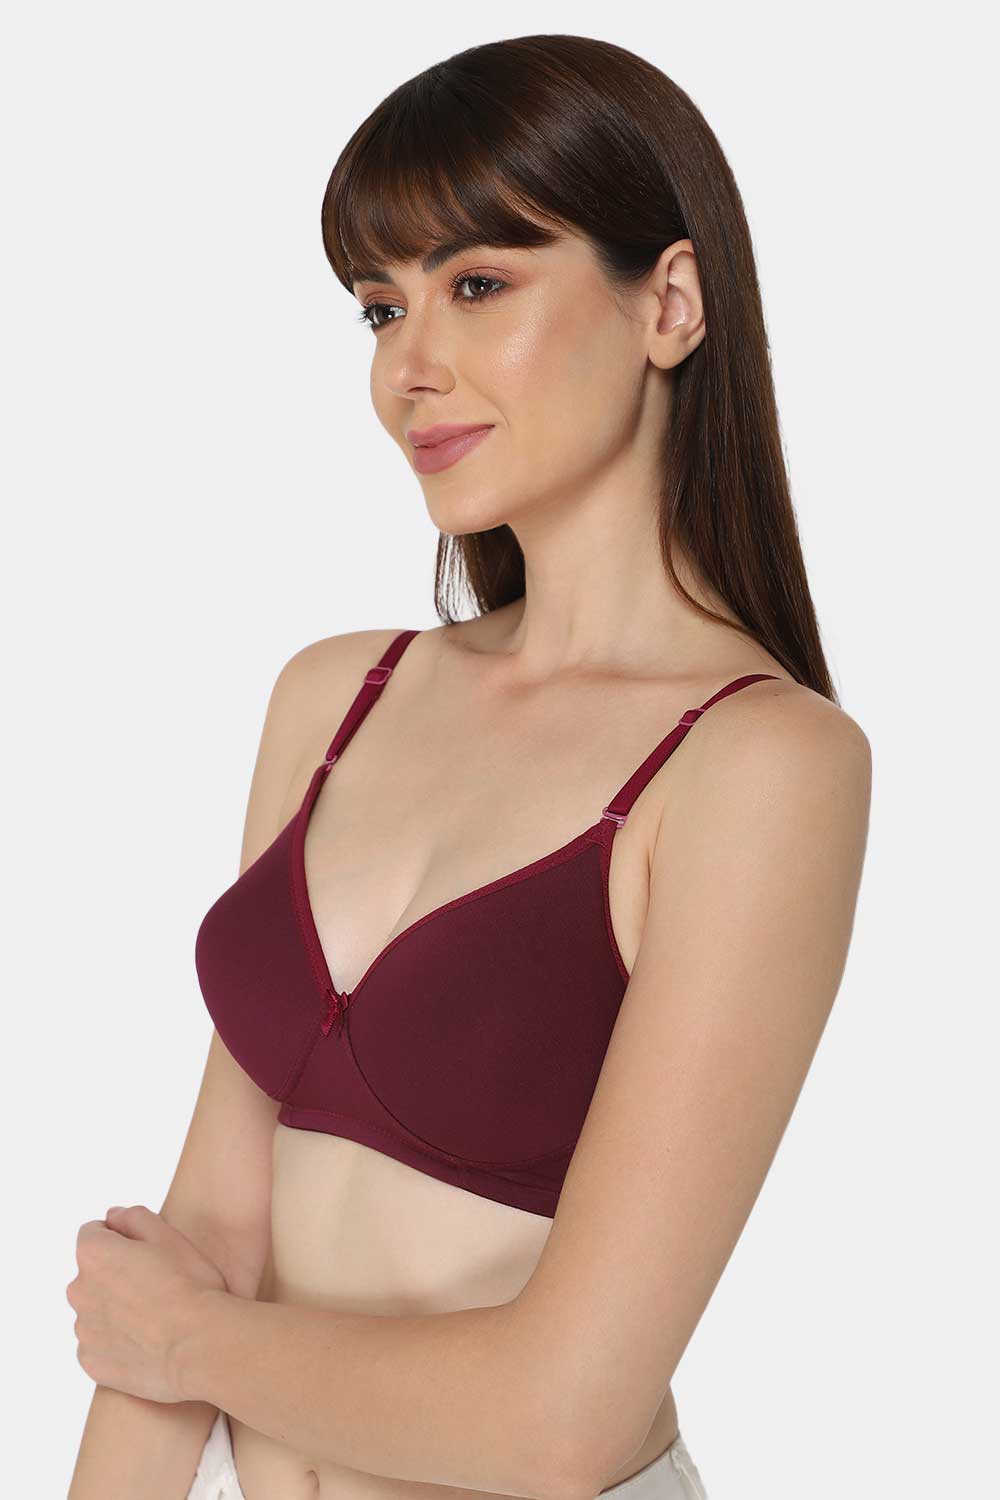 Intimacy Non-Wired Thin & Adjustable T-Shirt Padded Bra- Wine